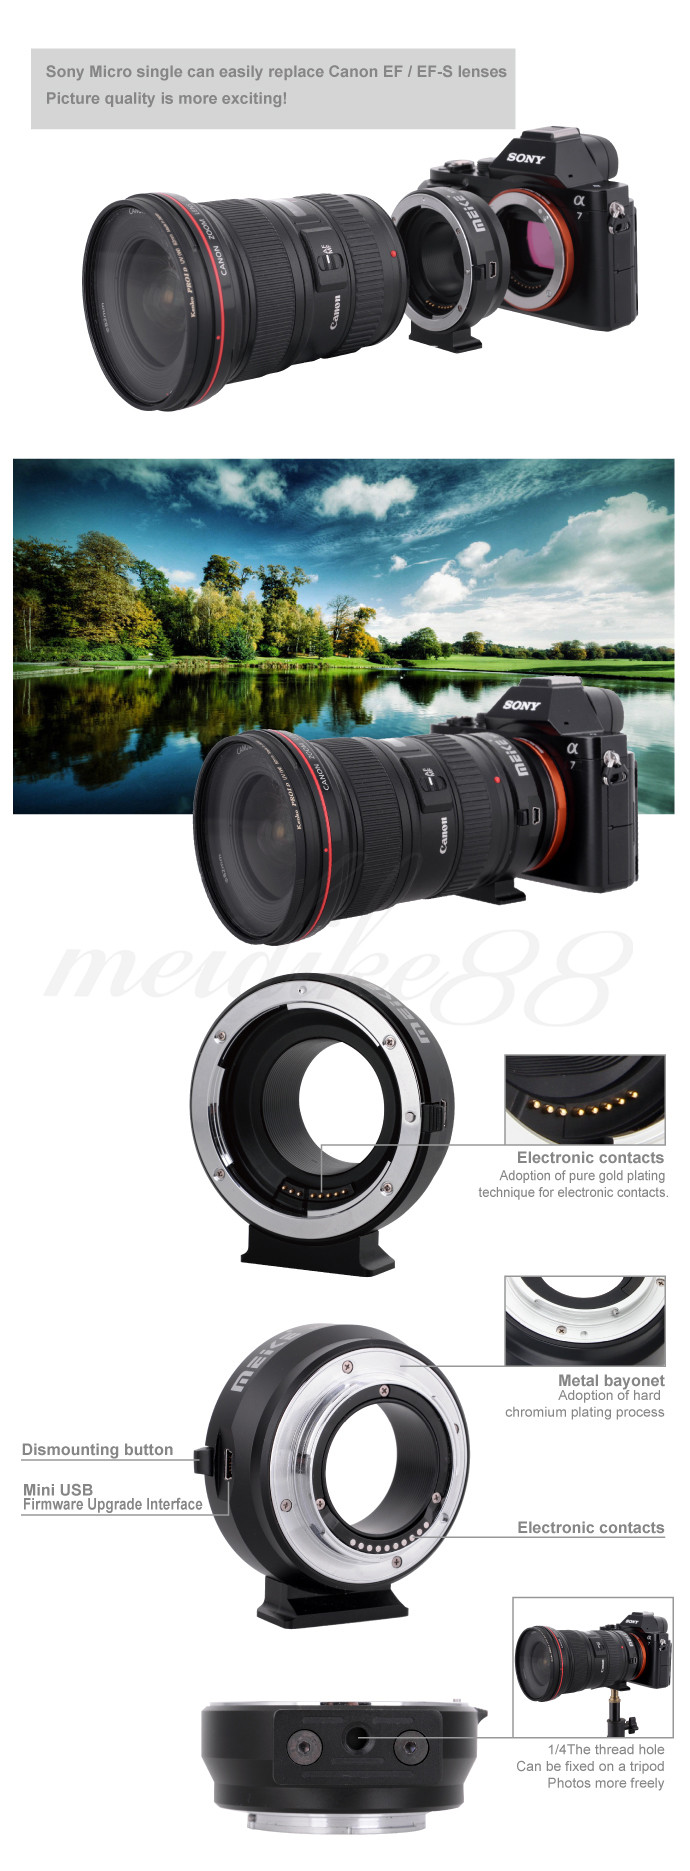 MK-S-AF4 Auto Focus mount lens adapter ring for SONY micro single camera to Canon EFEF-S Lens (3)